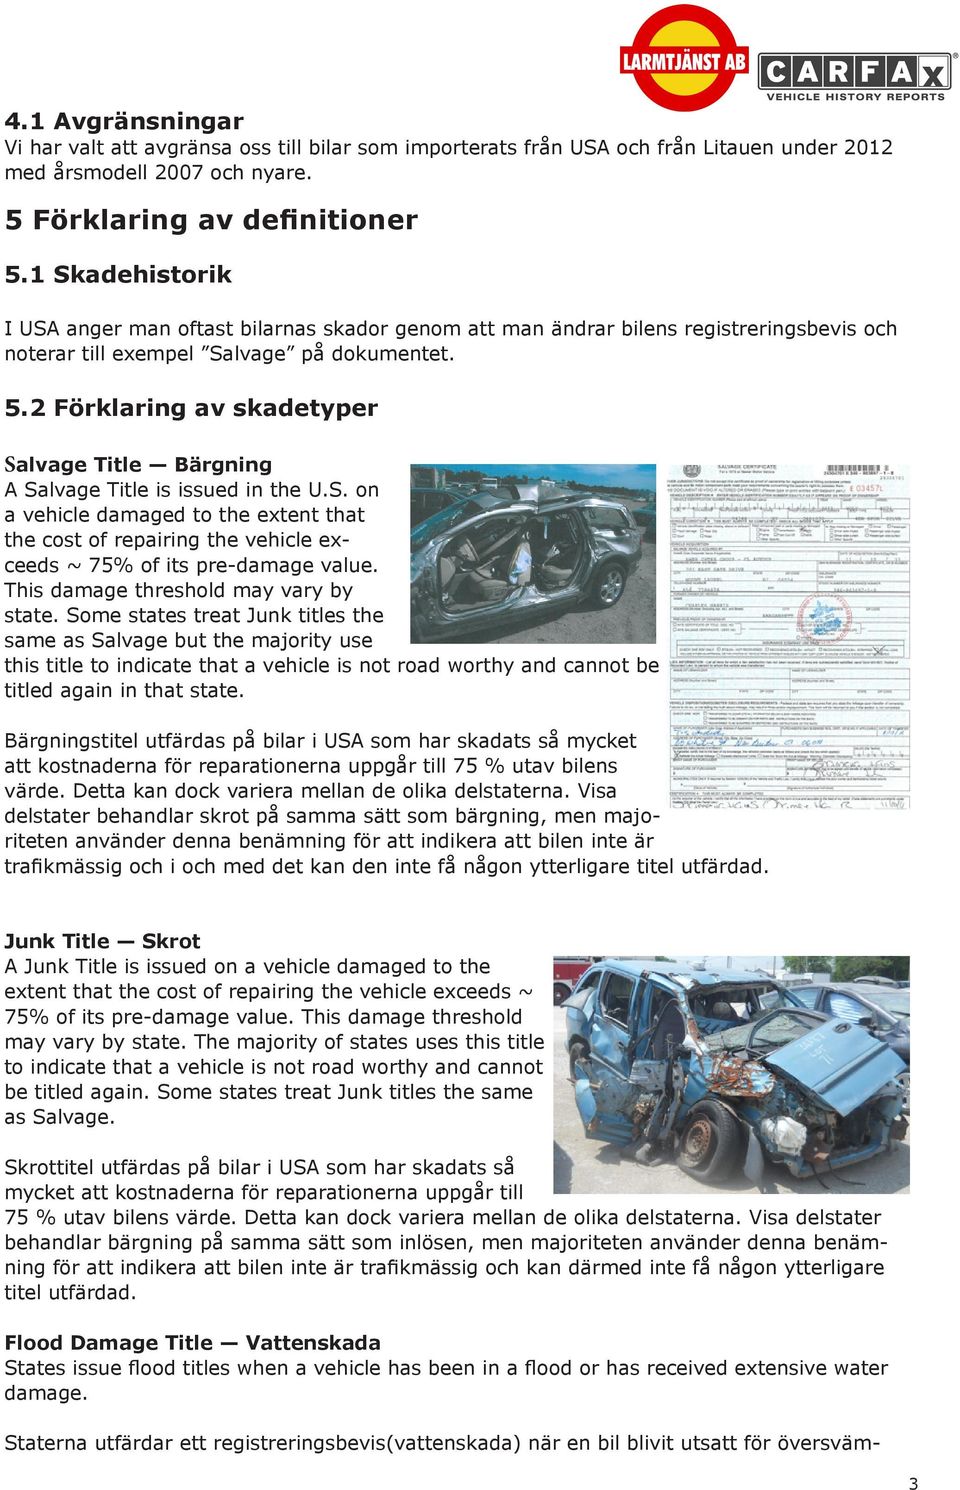 2 Förklaring av skadetyper Salvage Title Bärgning A Salvage Title is issued in the U.S. on a vehicle damaged to the extent that the cost of repairing the vehicle exceeds ~ 75% of its pre-damage value.